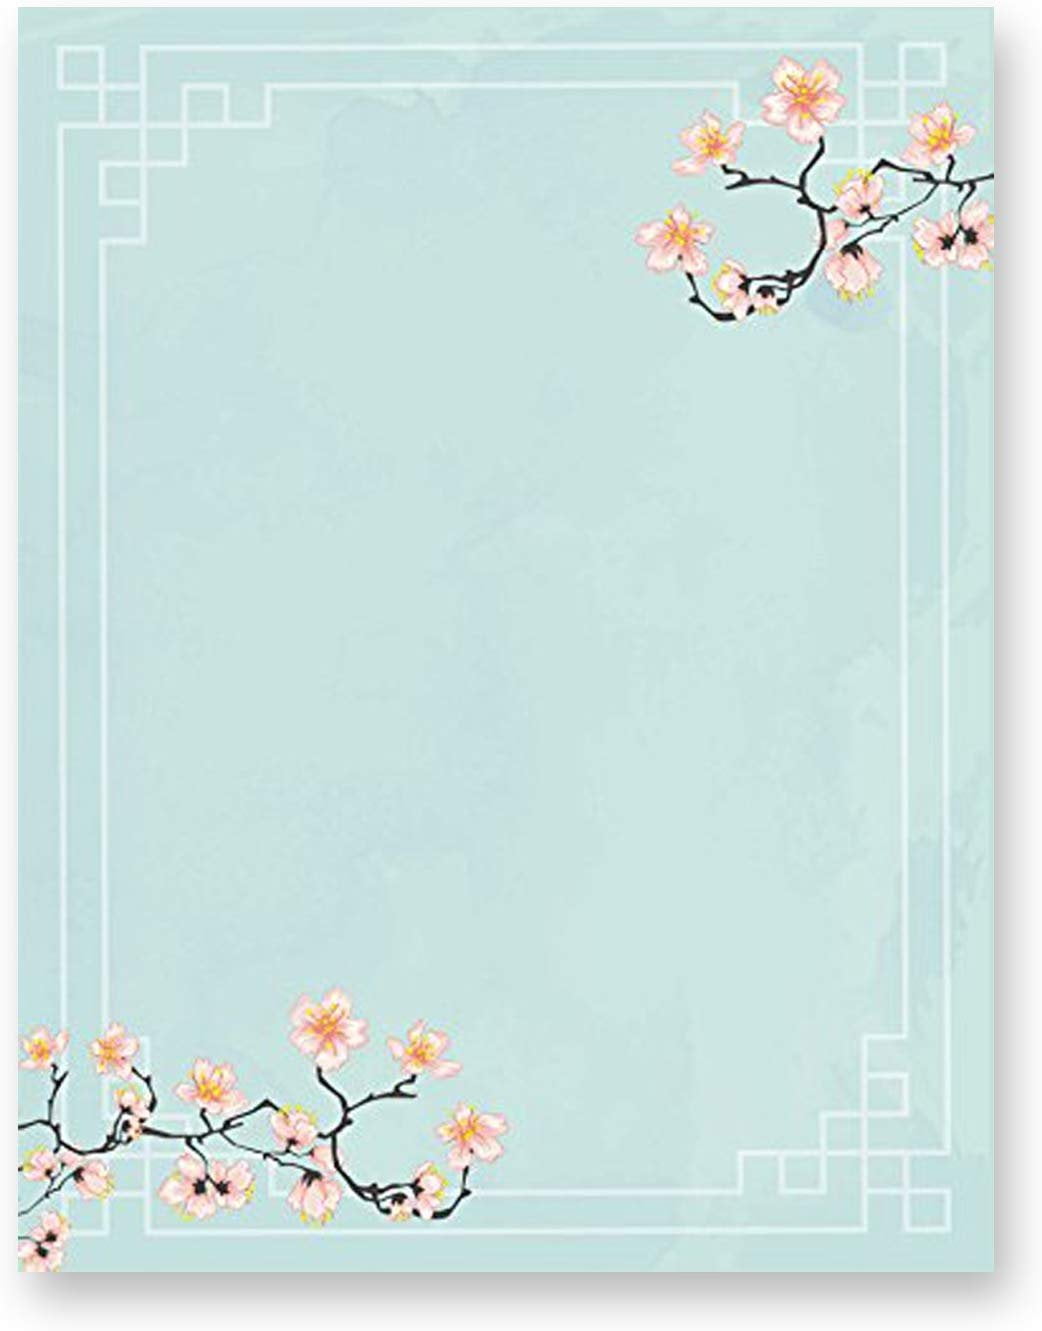 Motif Paper Stationery Paper Cherry Blossoms 100 Sheets DIN A4